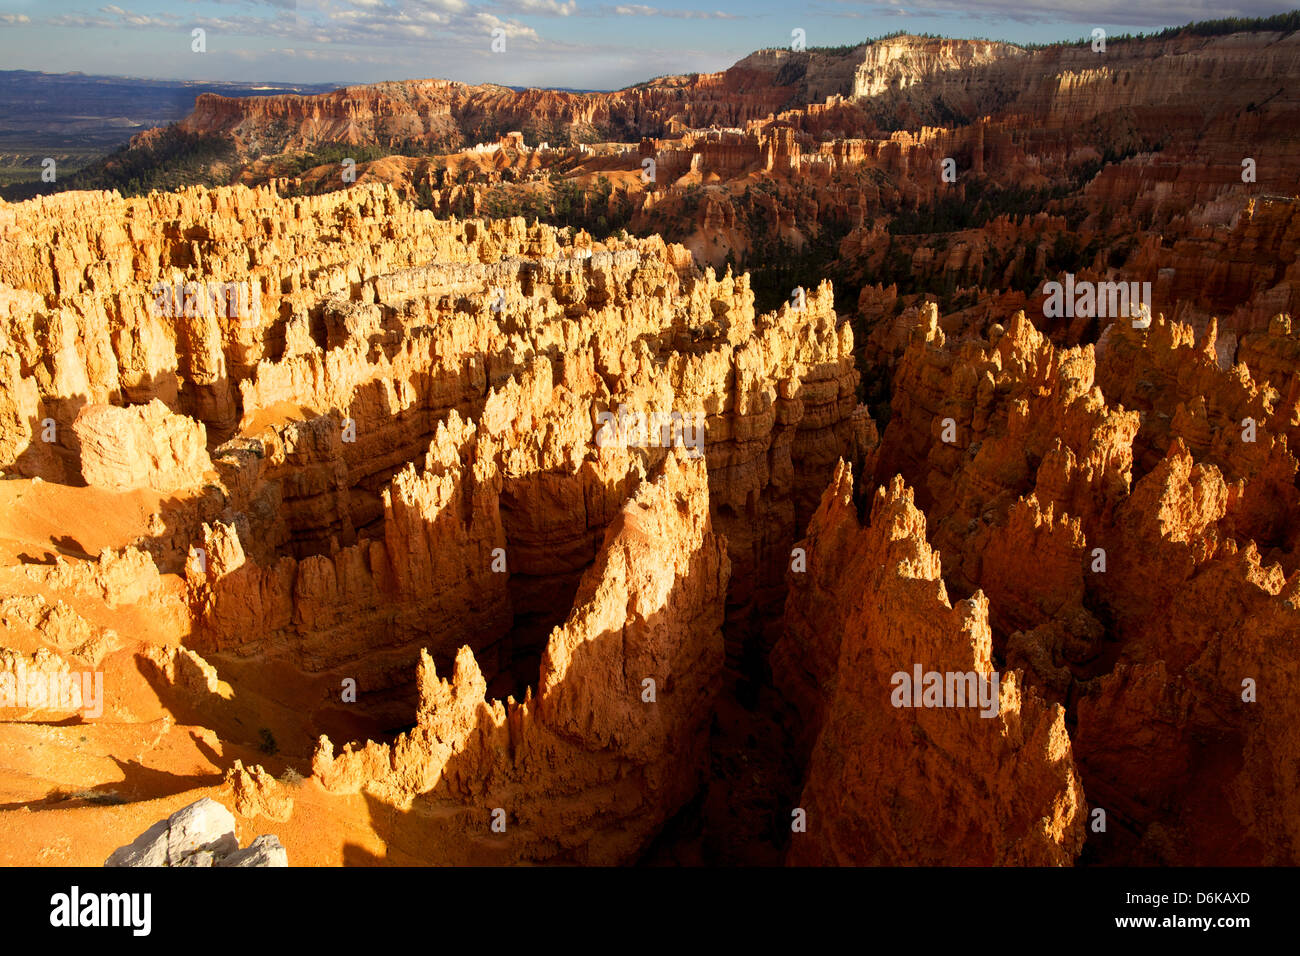 View over Bryce Canyon National Park at sunset, Utah, United States of America, North America Stock Photo